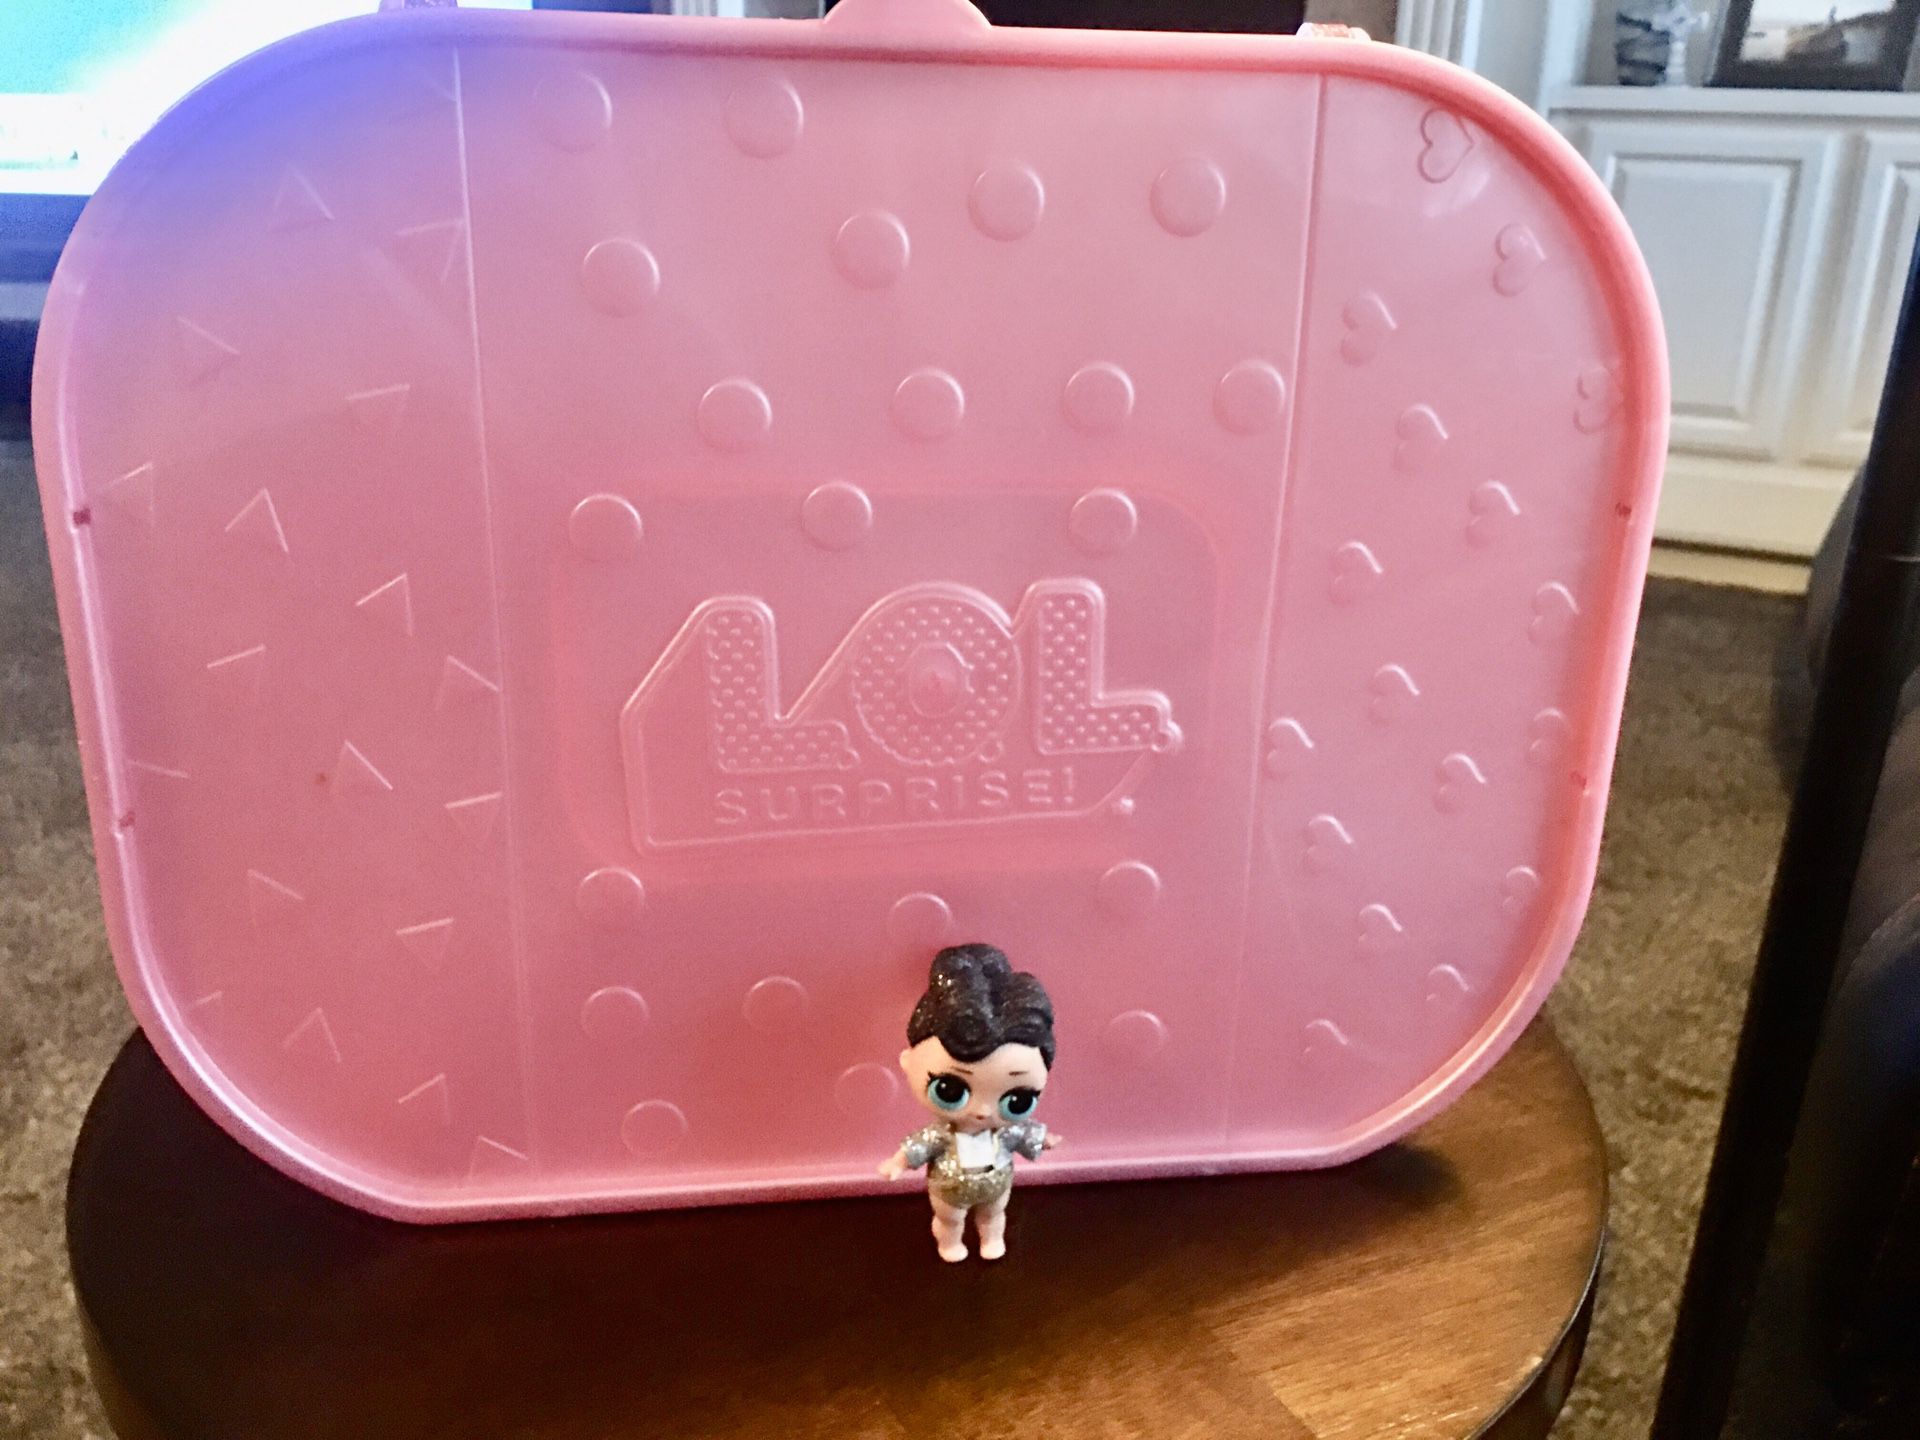 LOL SURPRISE DOLL CARRIER WITH HANDLE! HOLDS QUITE A FEW LOL DOLLS!! 15 X 7 INCHES - NICE & HUGE INSIDE ! CLEAN AND SPARKLY INCLUDES ONE LOL DOLL